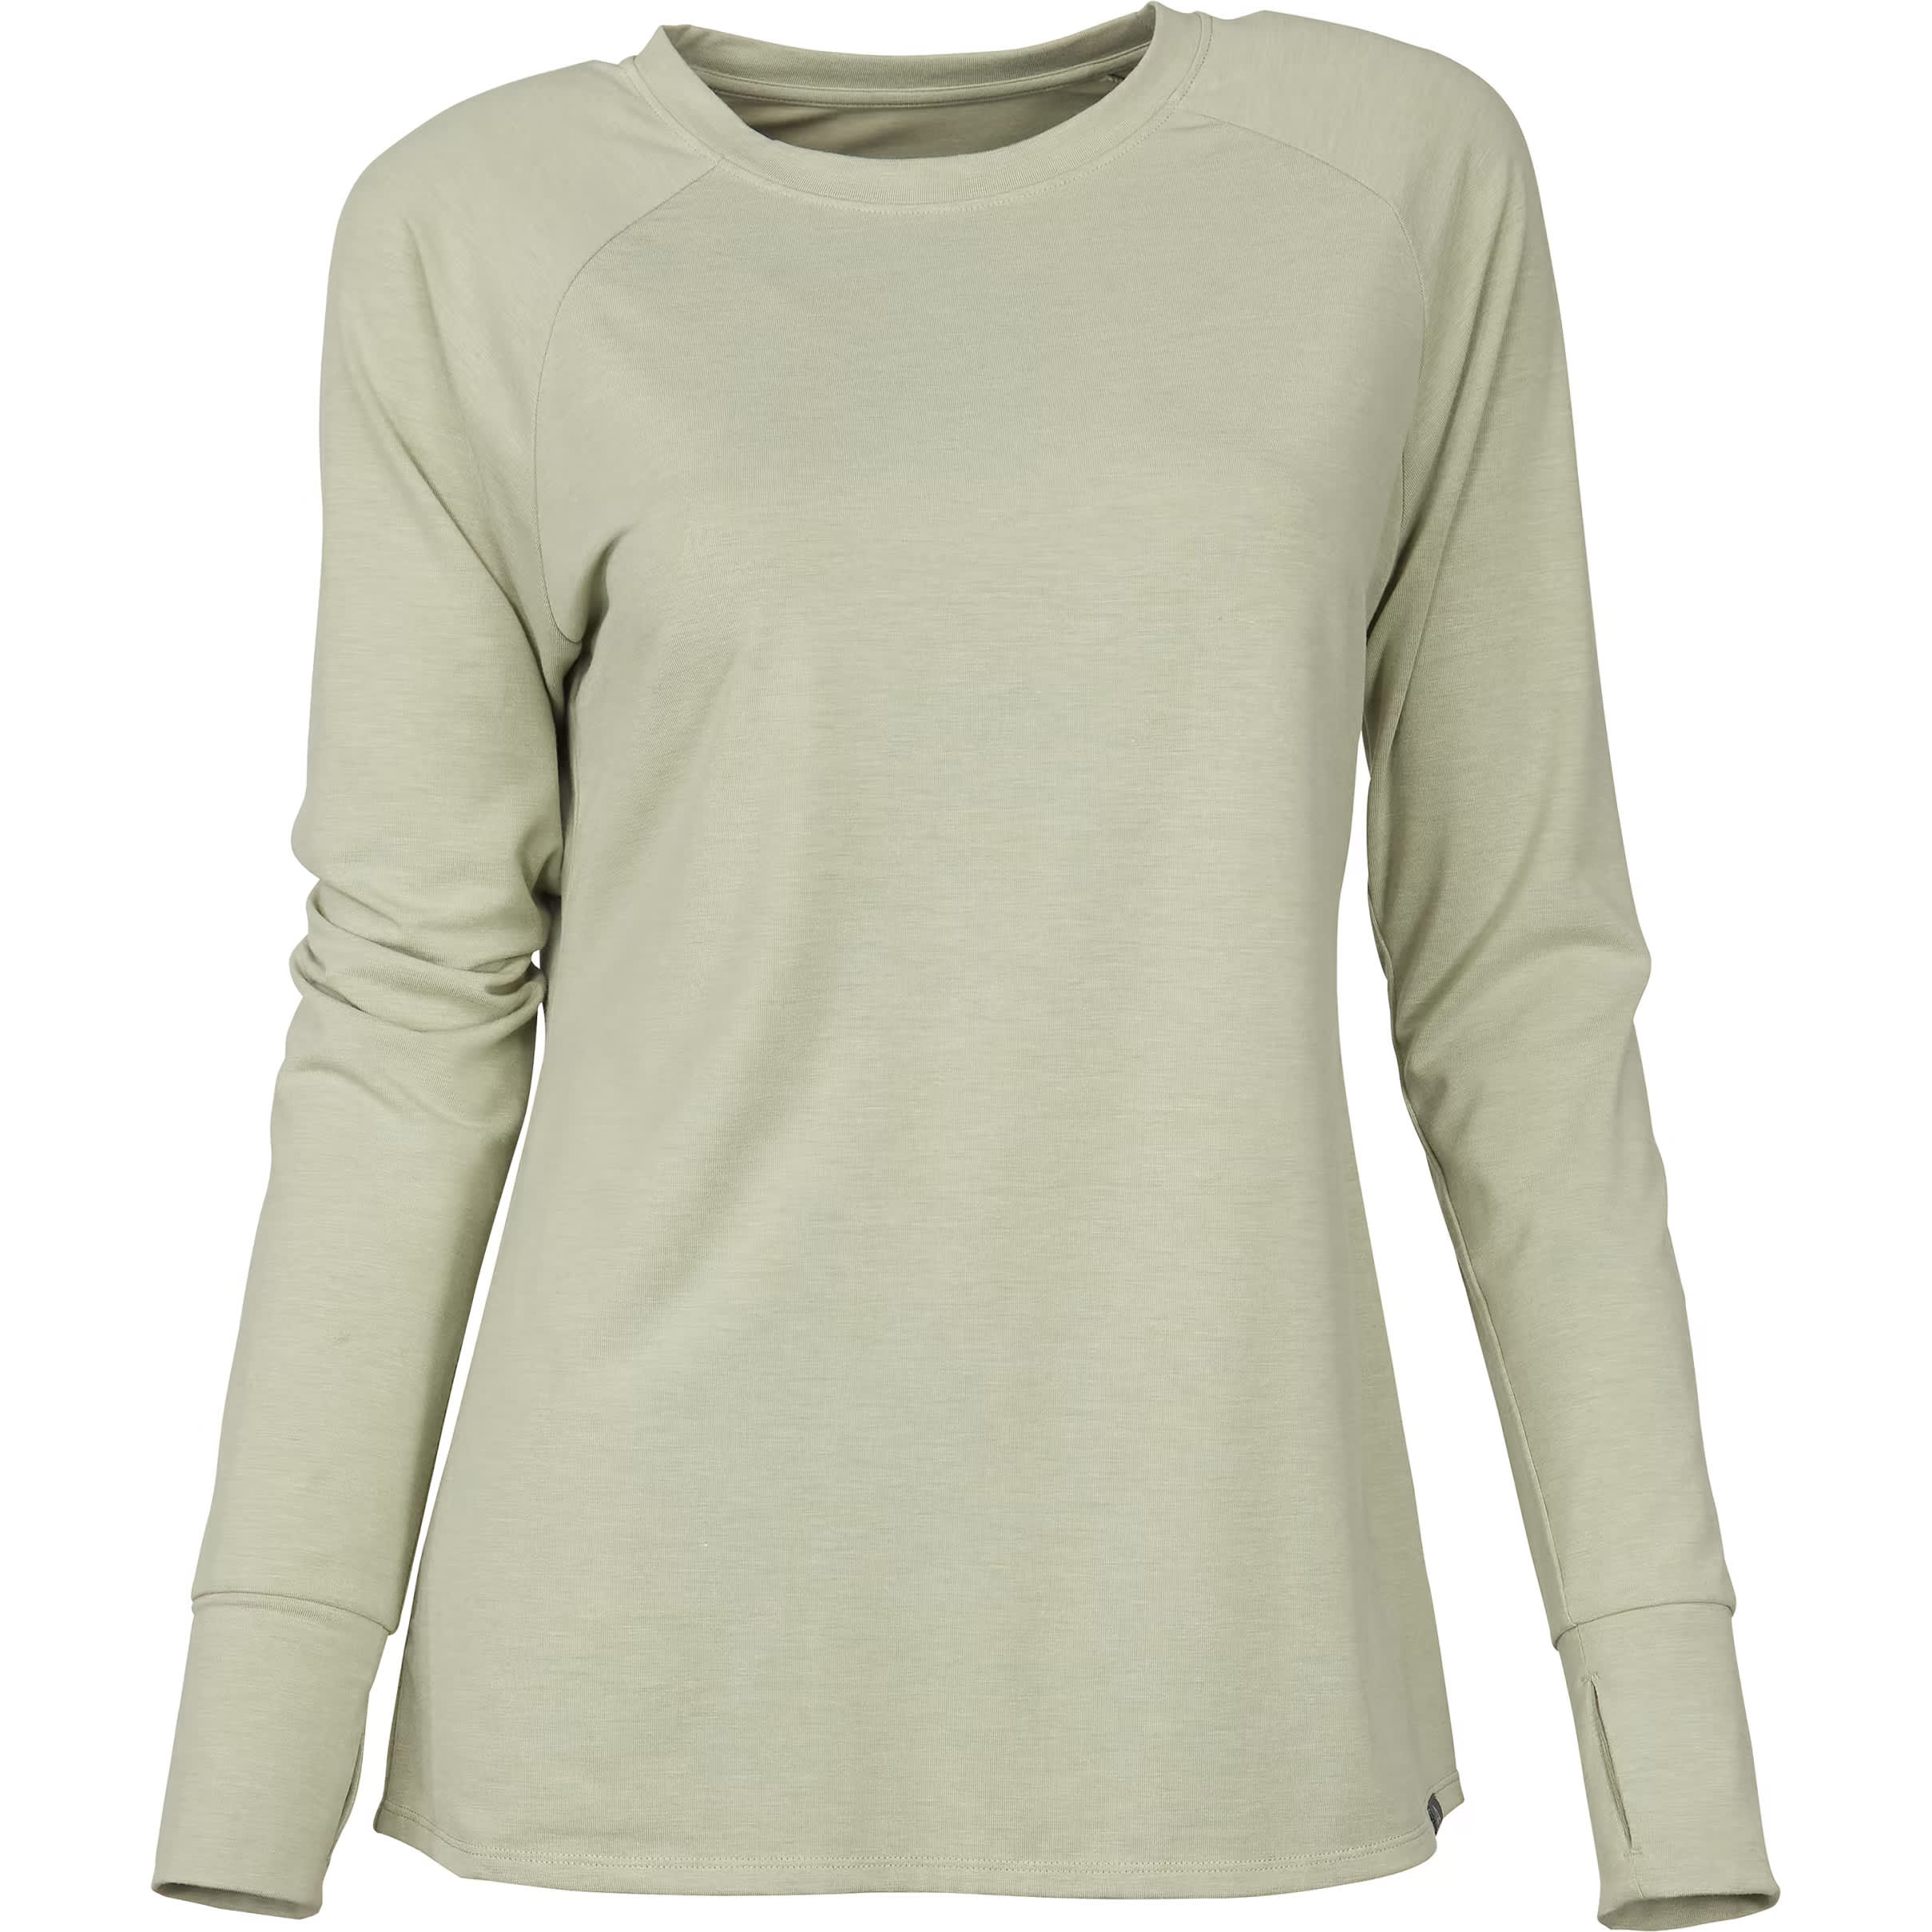 Under Armour Women's Outdoor Long Sleeve Shirt, Loose Fit, Quick